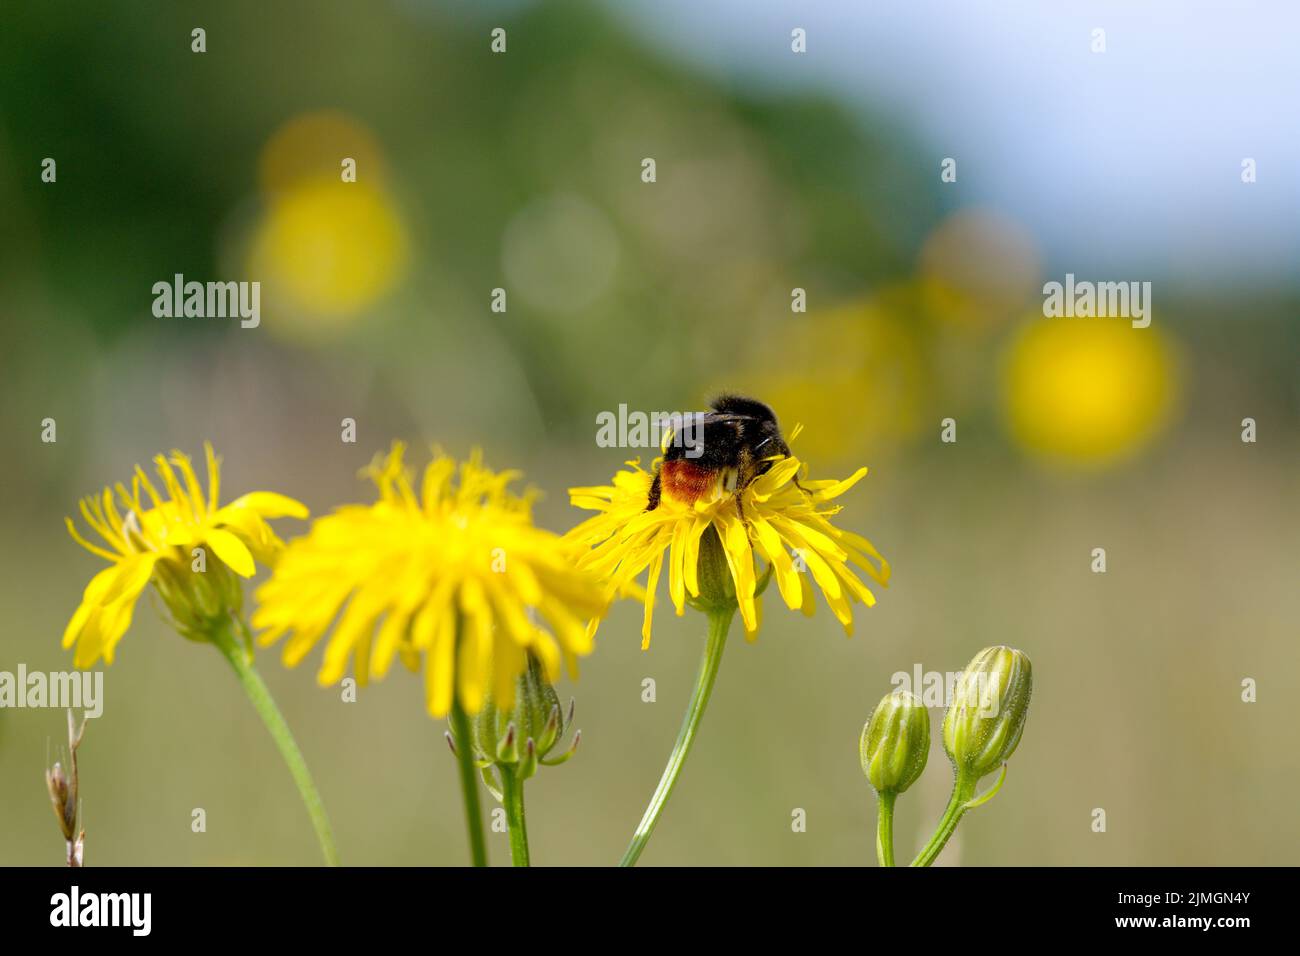 Bumblebee on a yellow flower Stock Photo